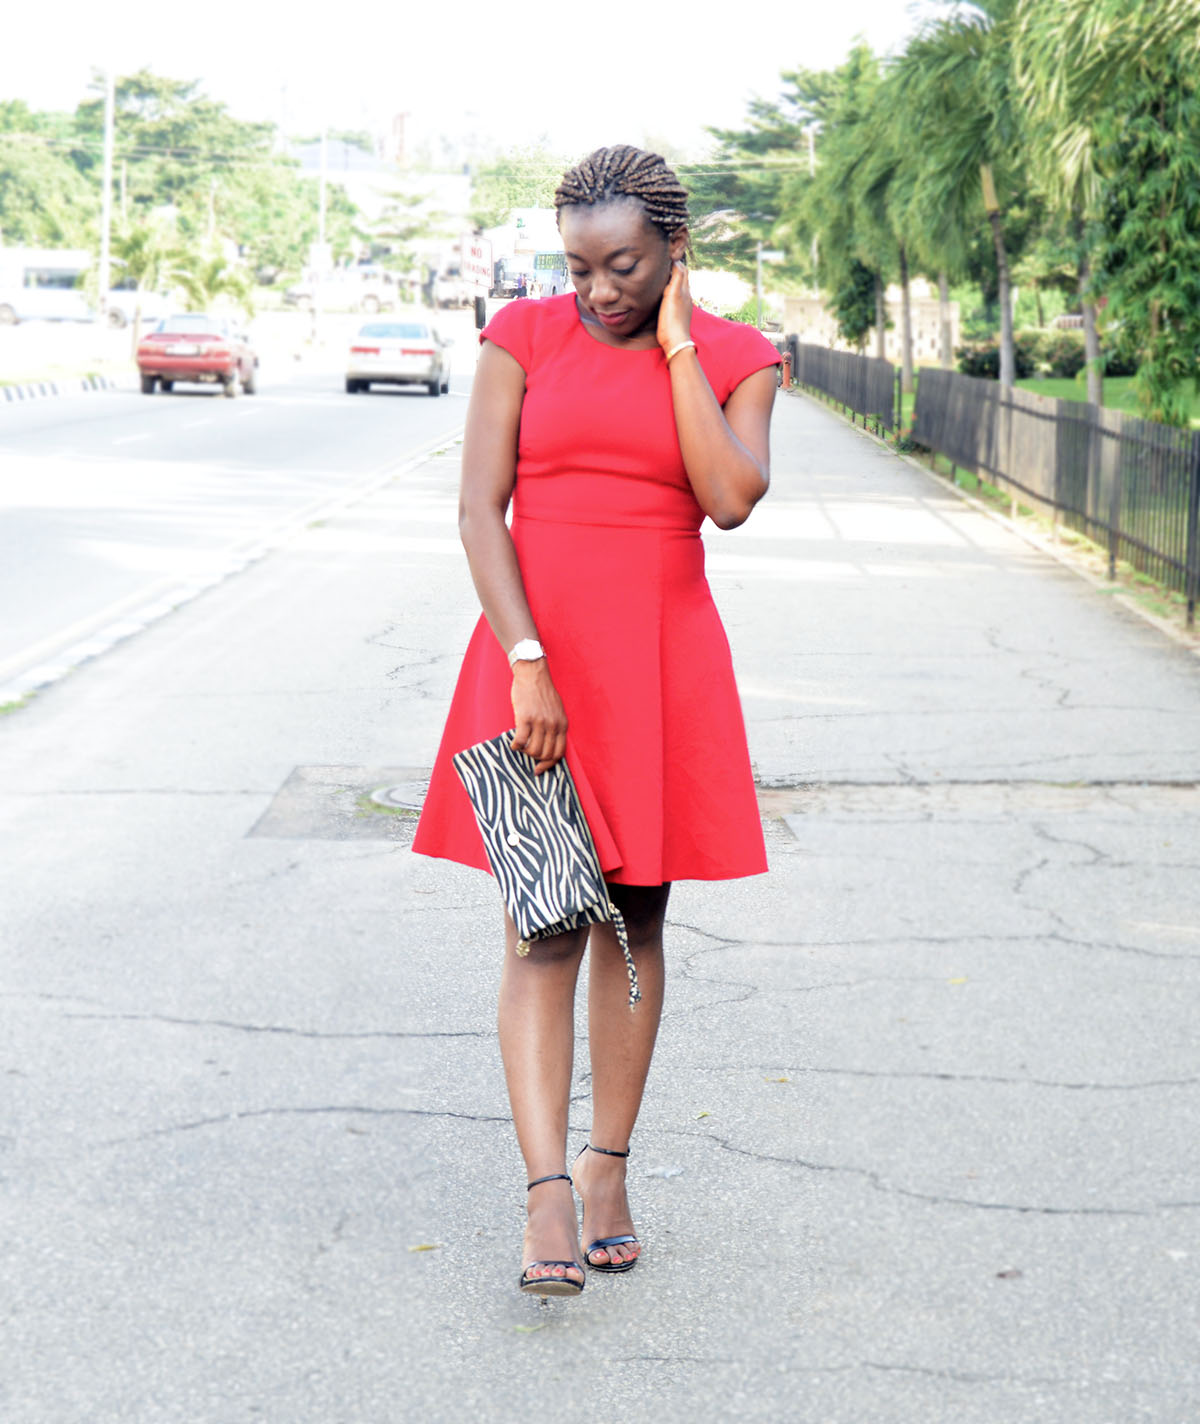 Little Red Dress And Zebra Print outfit style